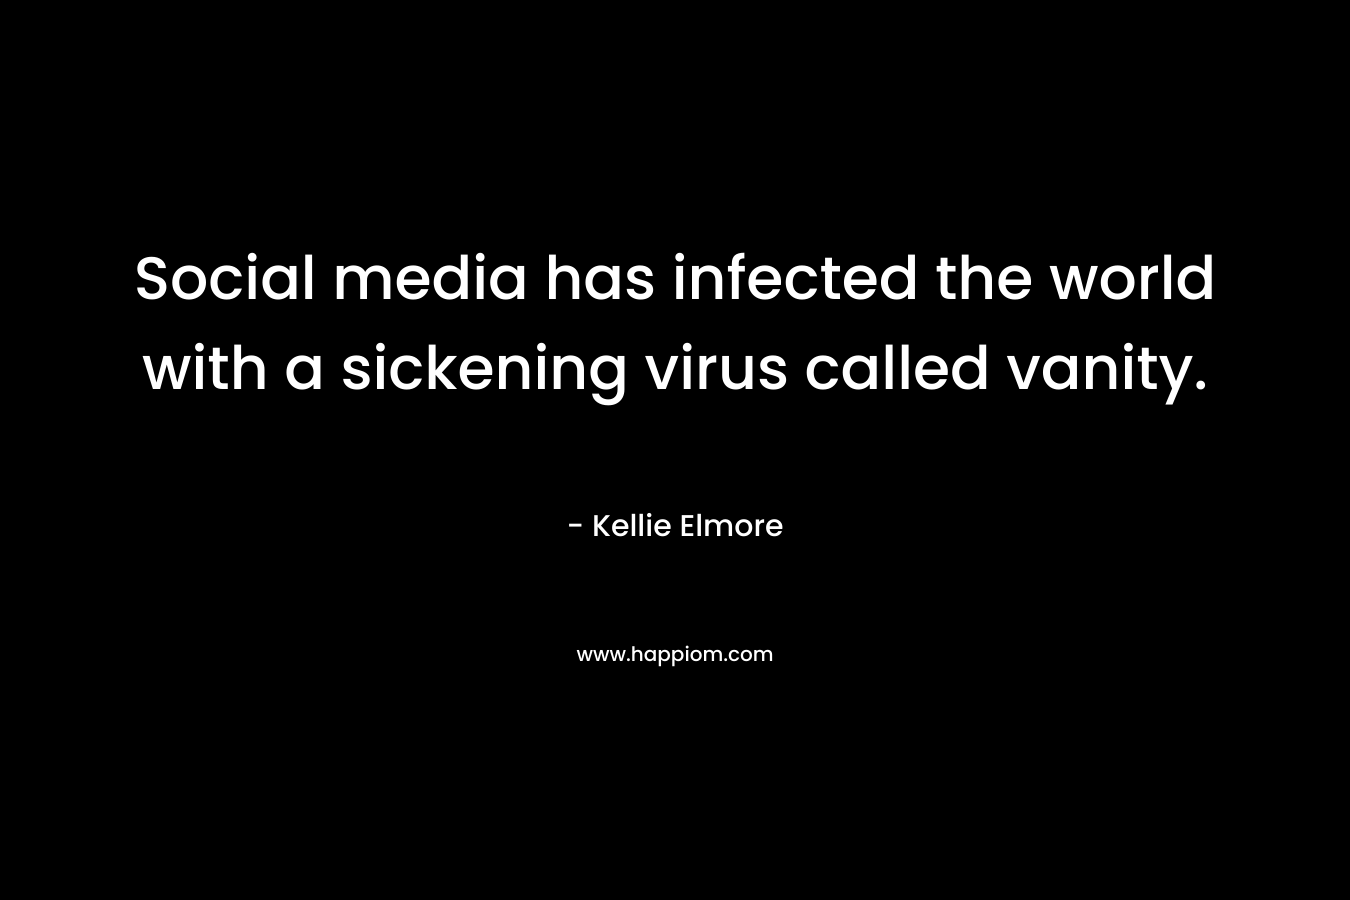 Social media has infected the world with a sickening virus called vanity. – Kellie Elmore